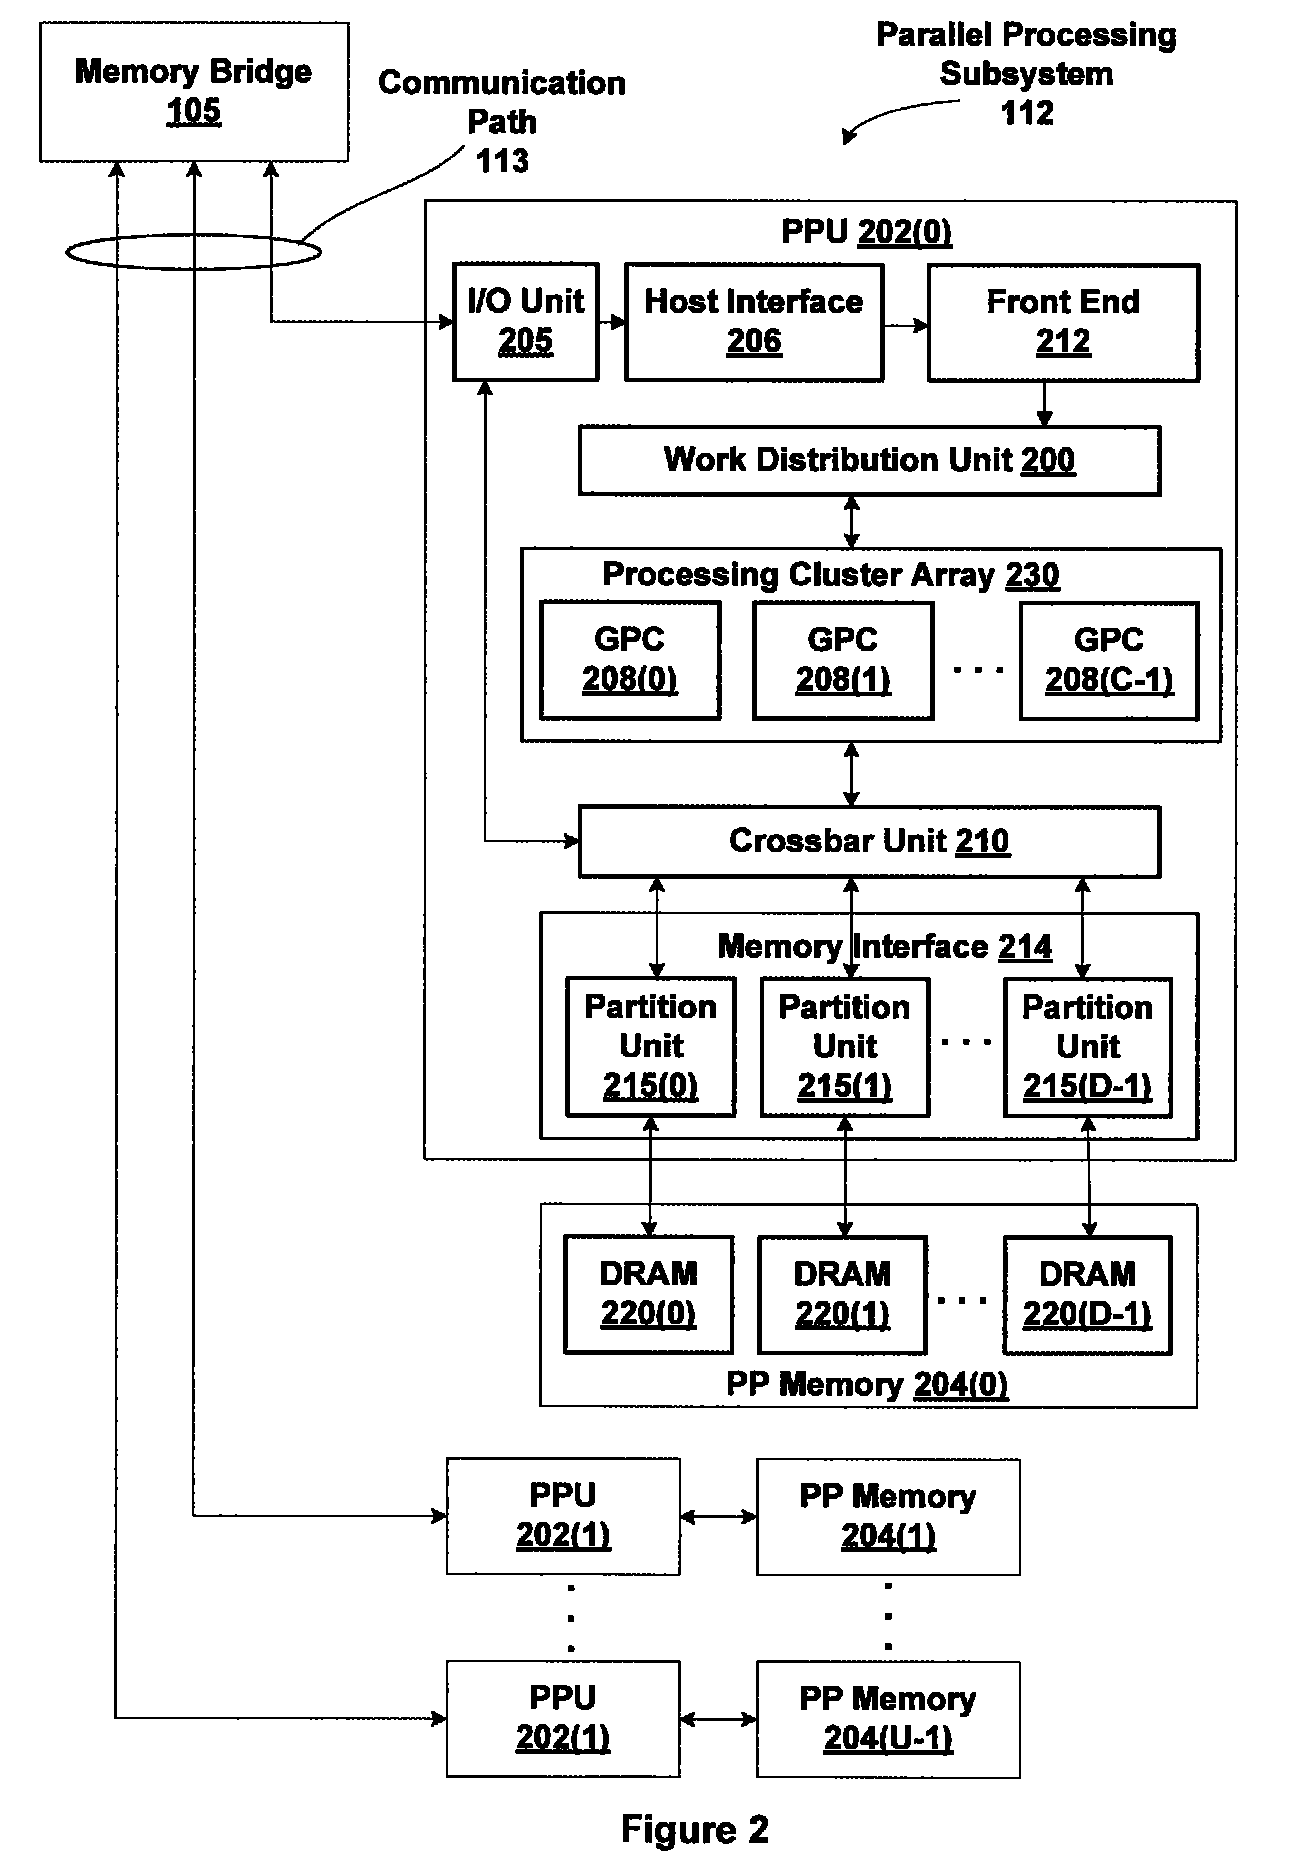 Zero-copy data sharing by cooperating asymmetric coprocessors